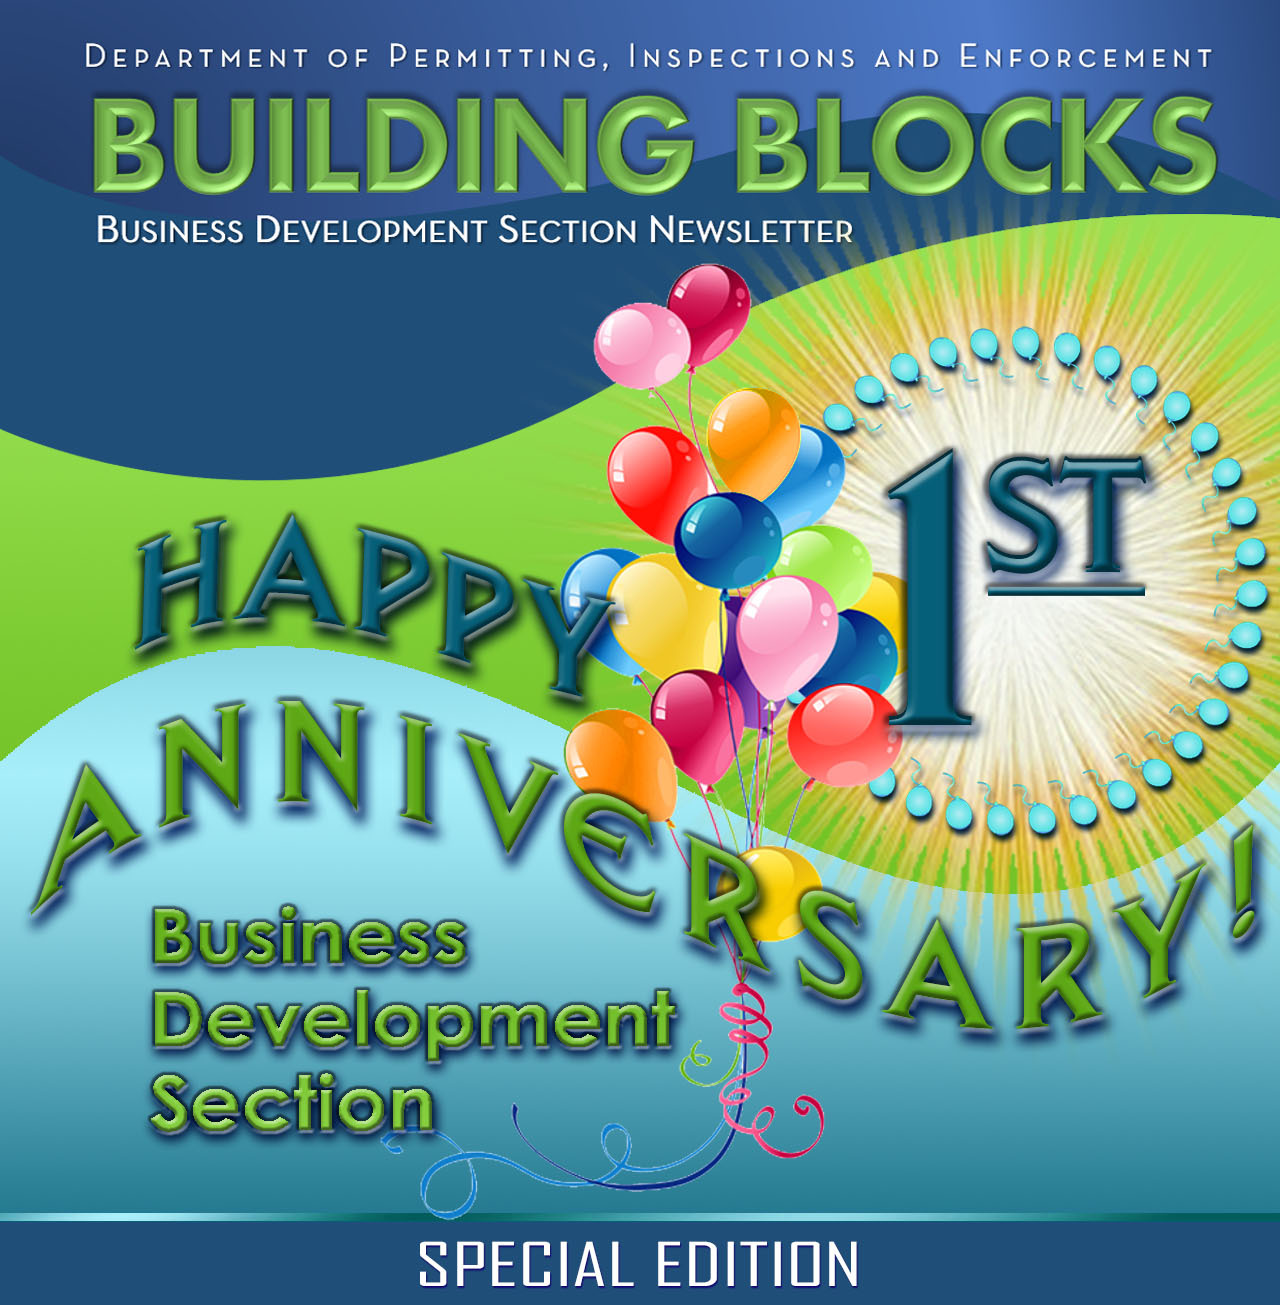 Business Development Section's 1 year anniversary issue